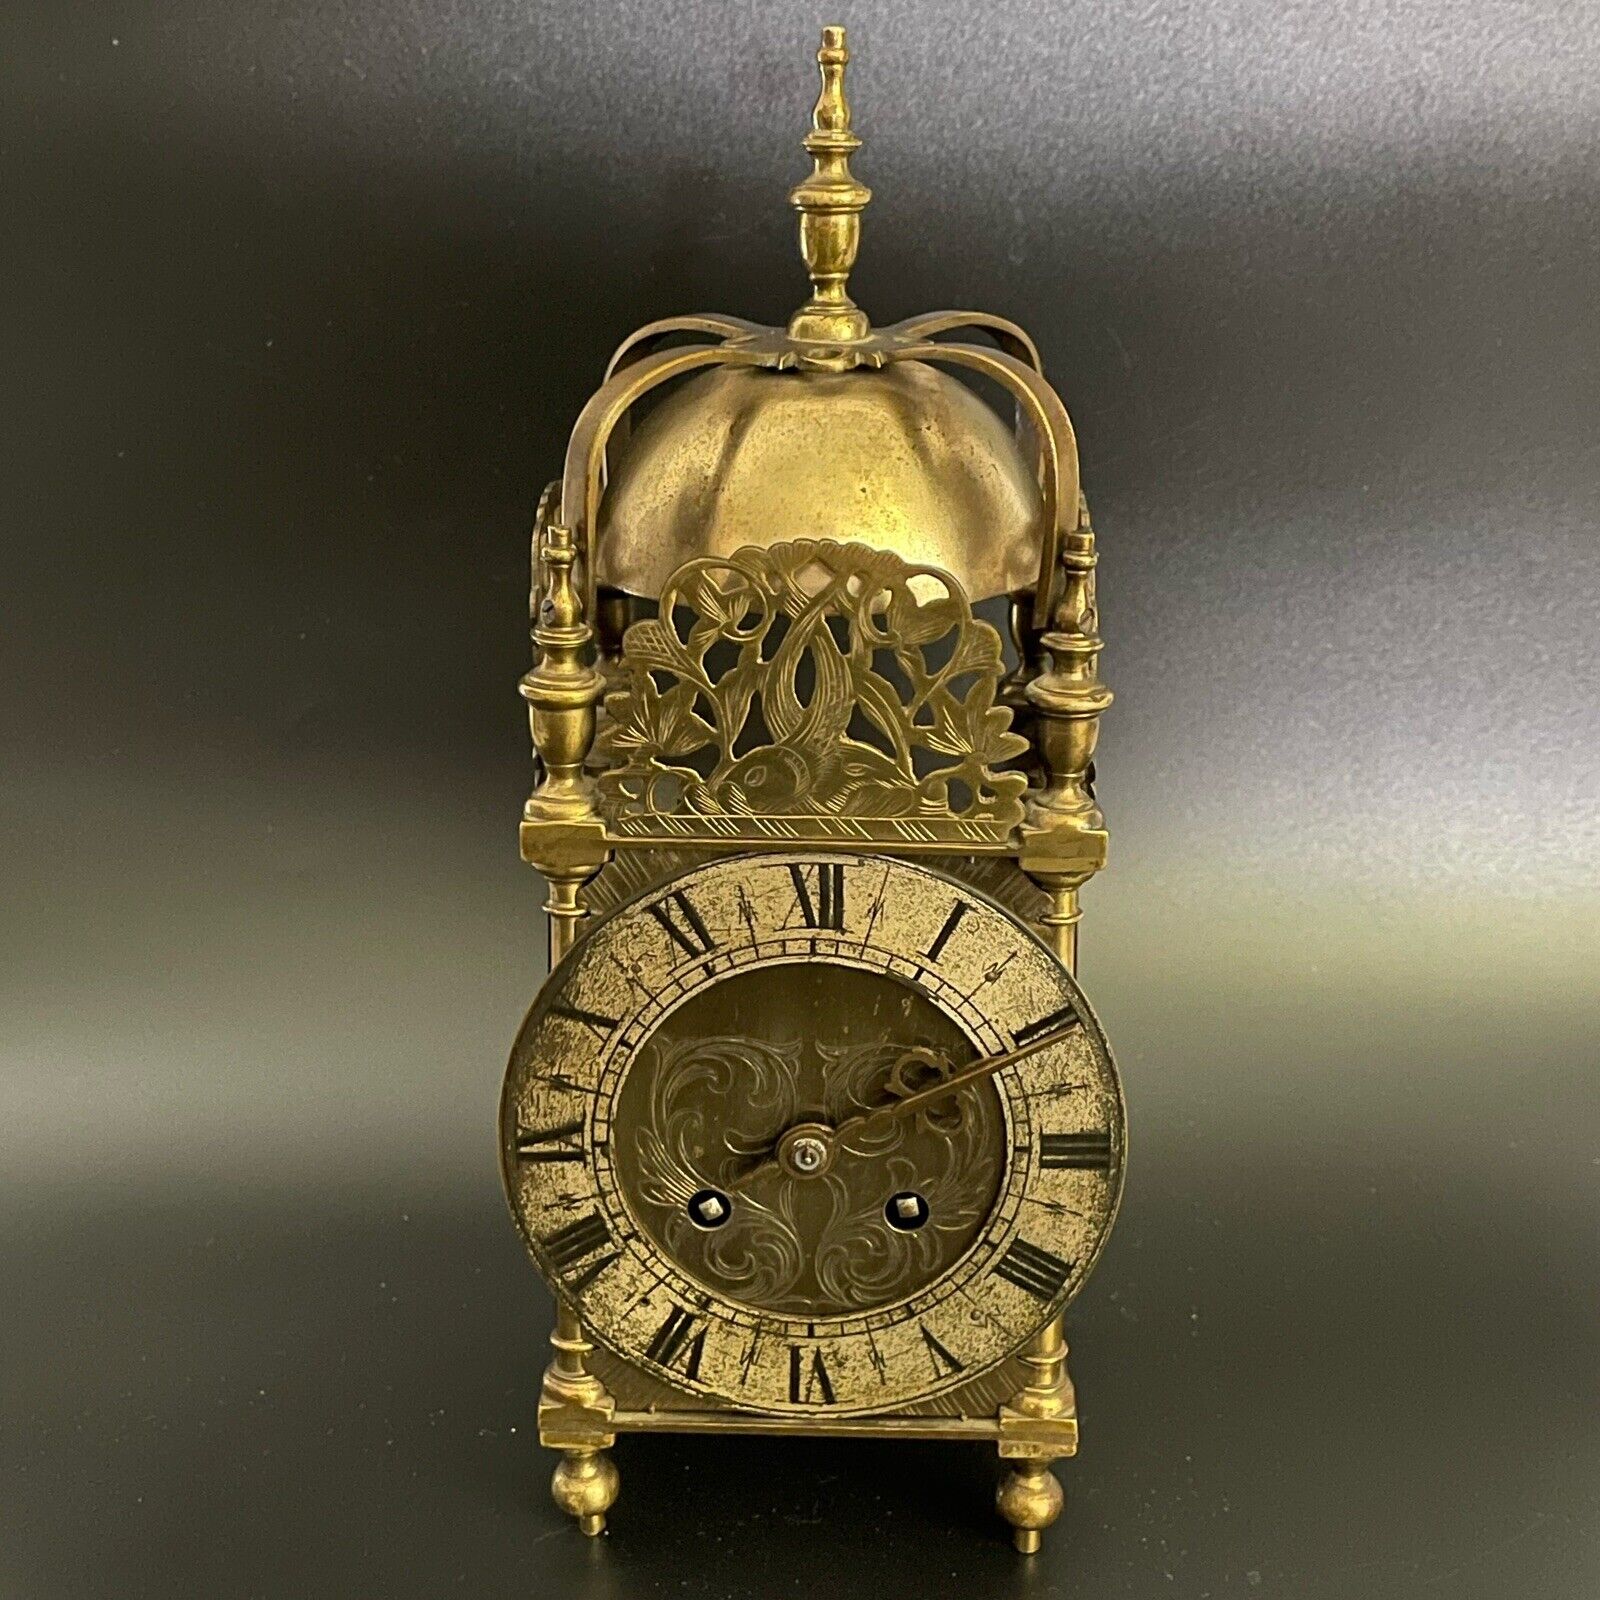 Antique 17-1800’s Solid Brass French Lantern Clock By JAPY FREBES, Needs Service